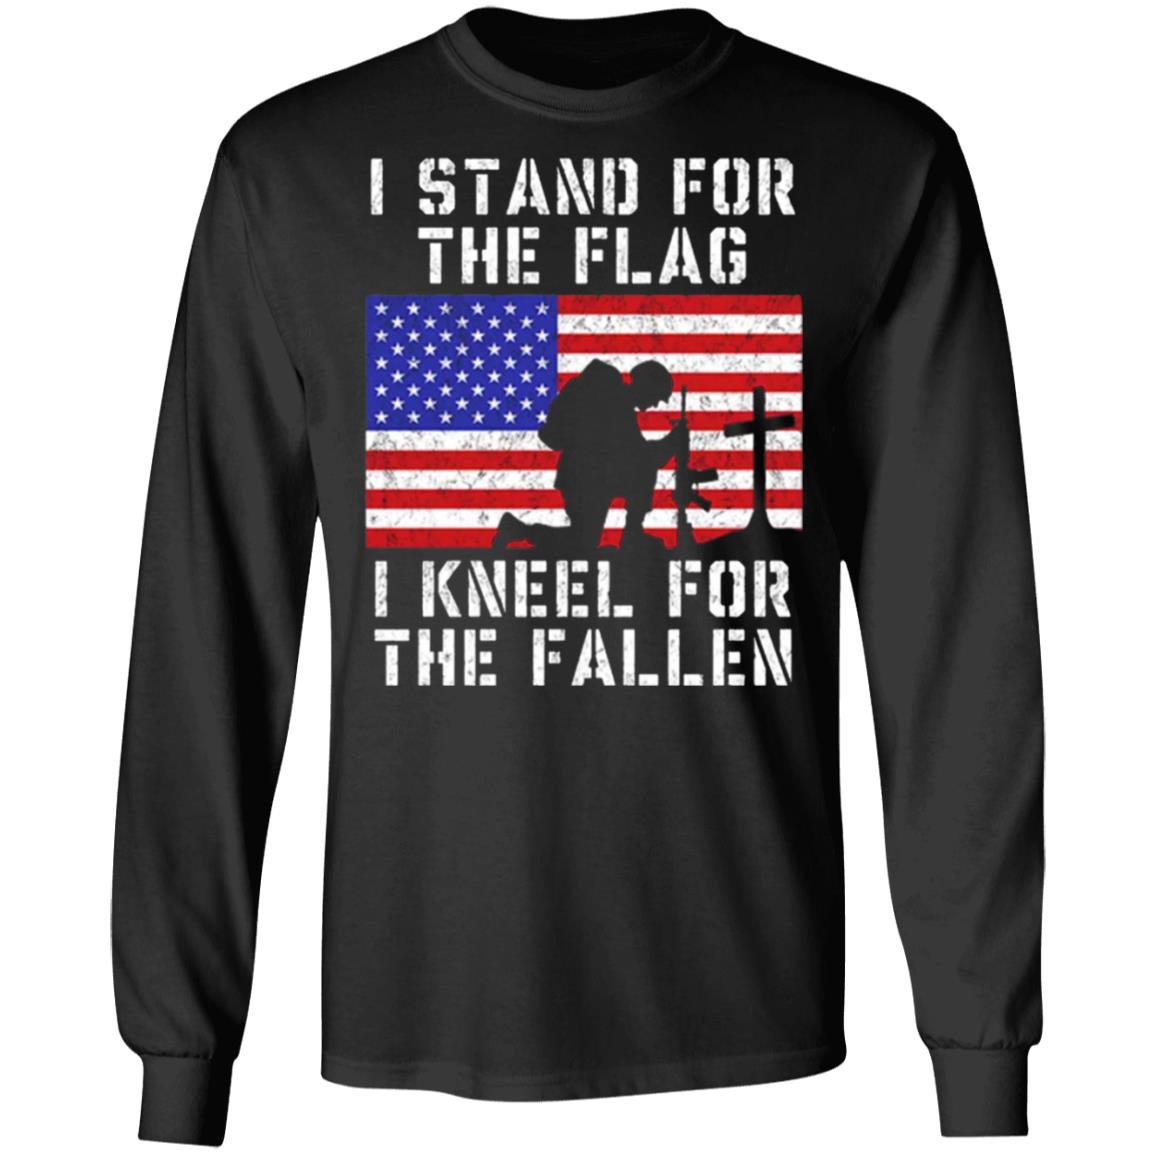 I Stand for The Flag Shirt, I Kneel for The Fallen T-Shirt Hoodie - Q ...